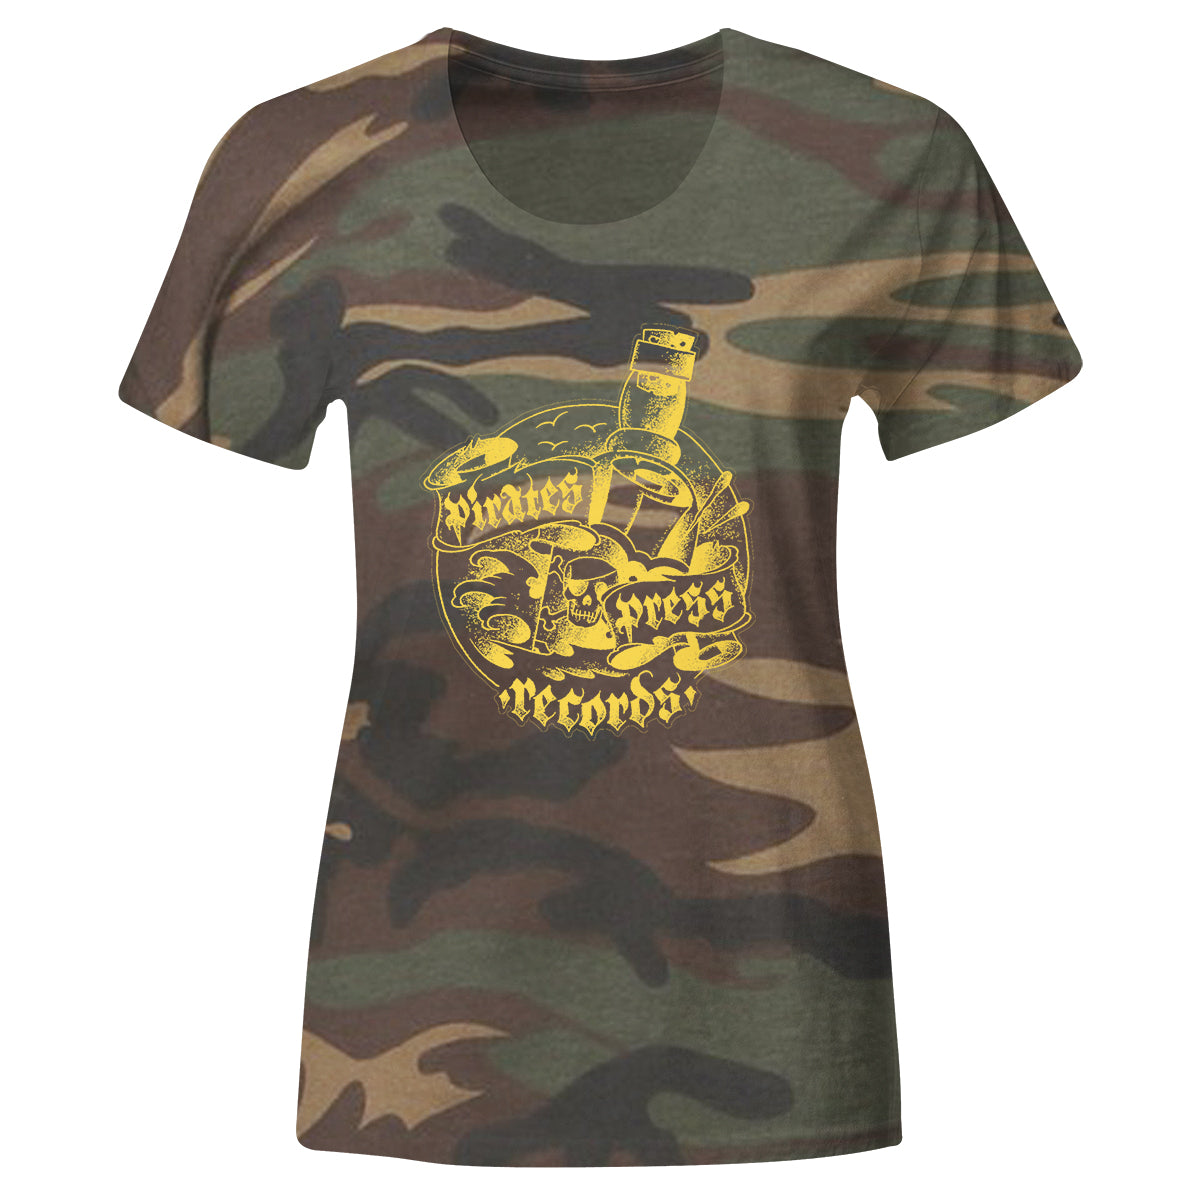 Pirates Press Records - Bottle - Yellow on Camo - T-Shirt - Fitted